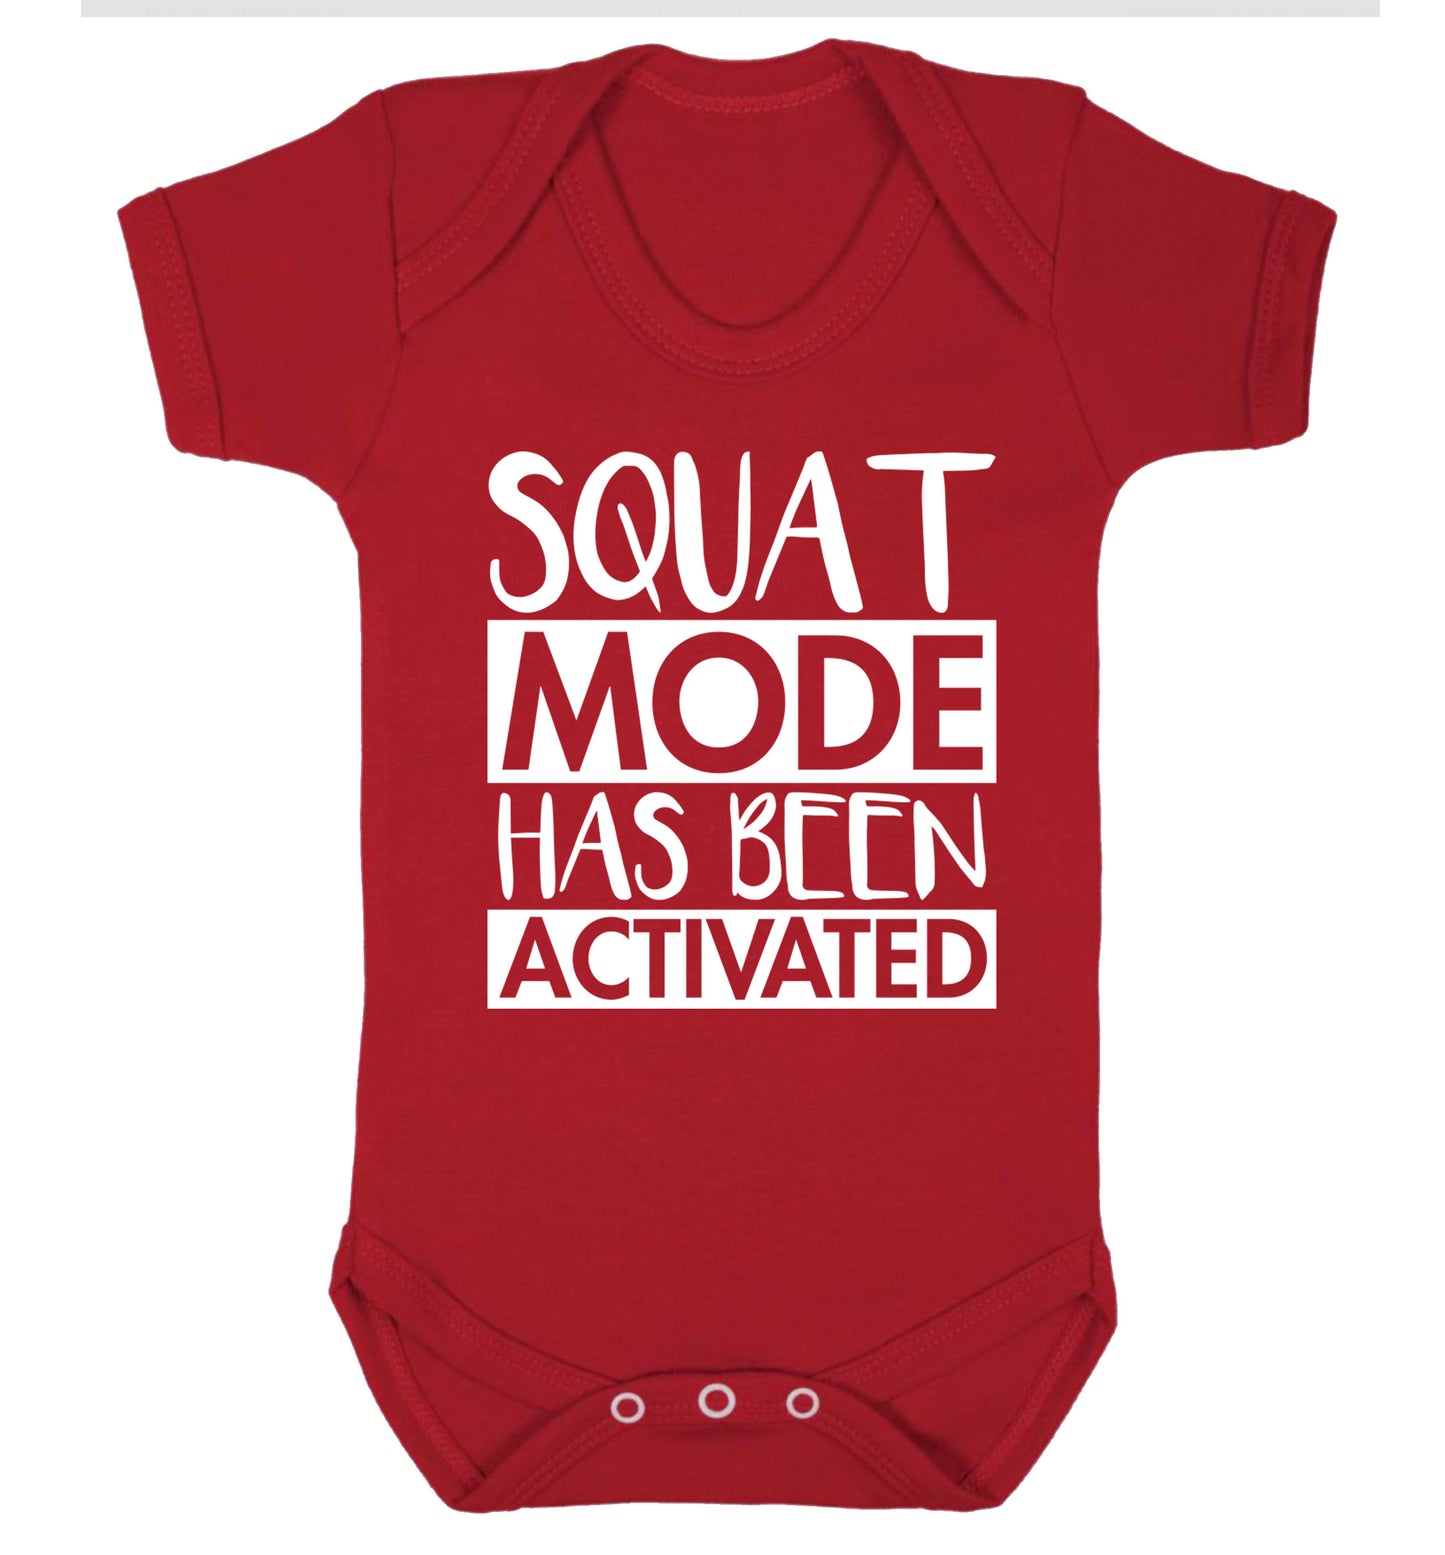 Squat mode activated Baby Vest red 18-24 months